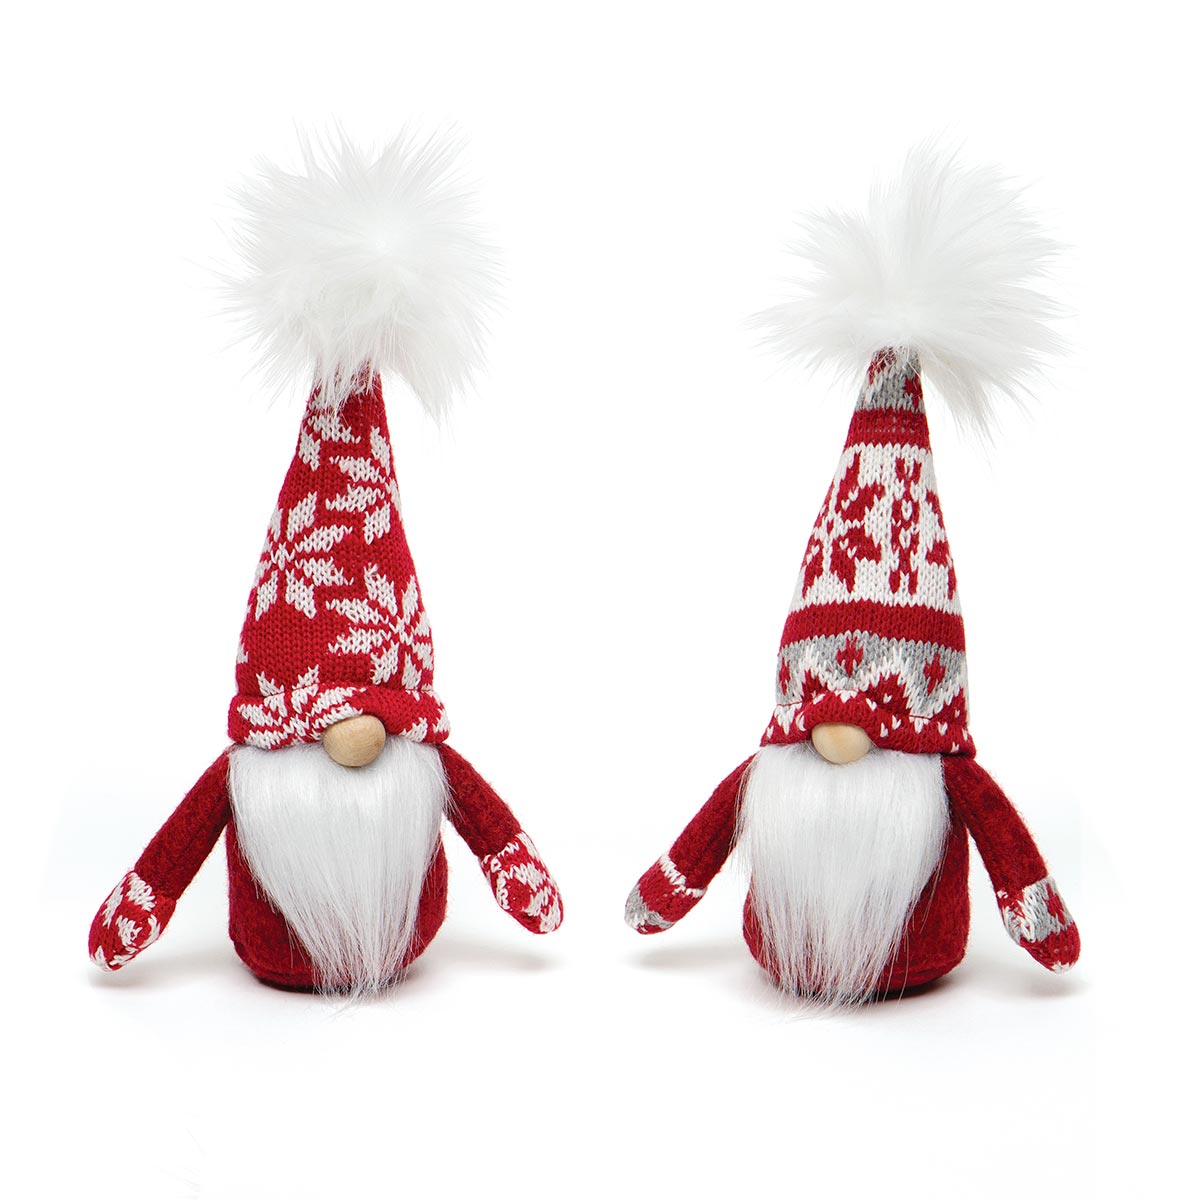 FINNISH GNOME RED/WHITE WITH FUR POM-POM, SWEATER HAT